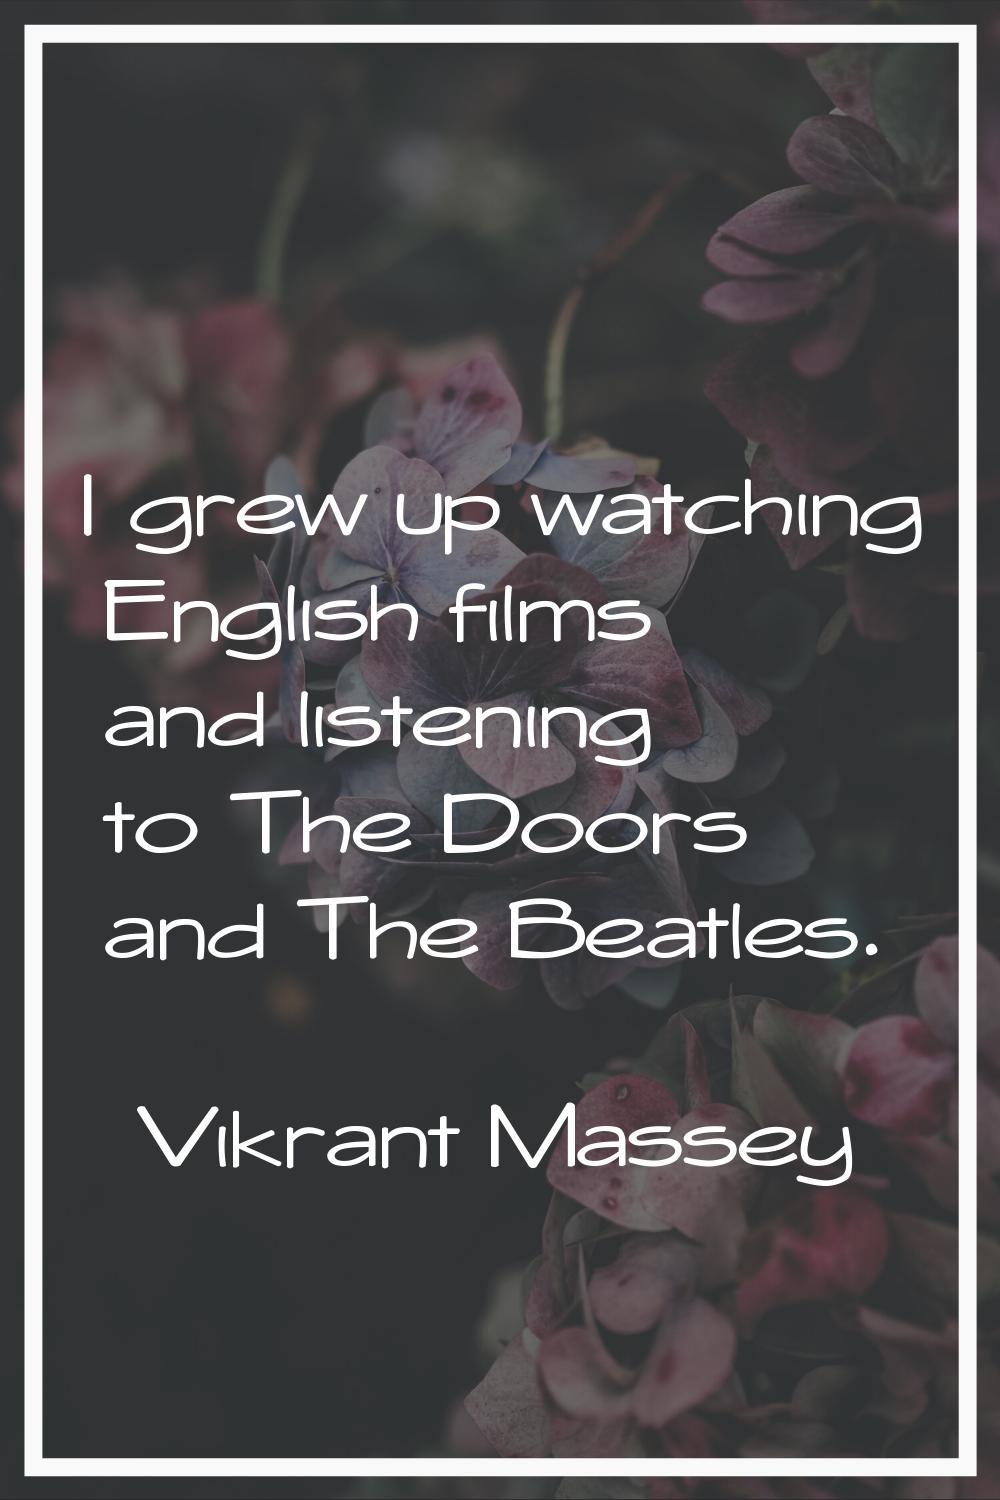 I grew up watching English films and listening to The Doors and The Beatles.